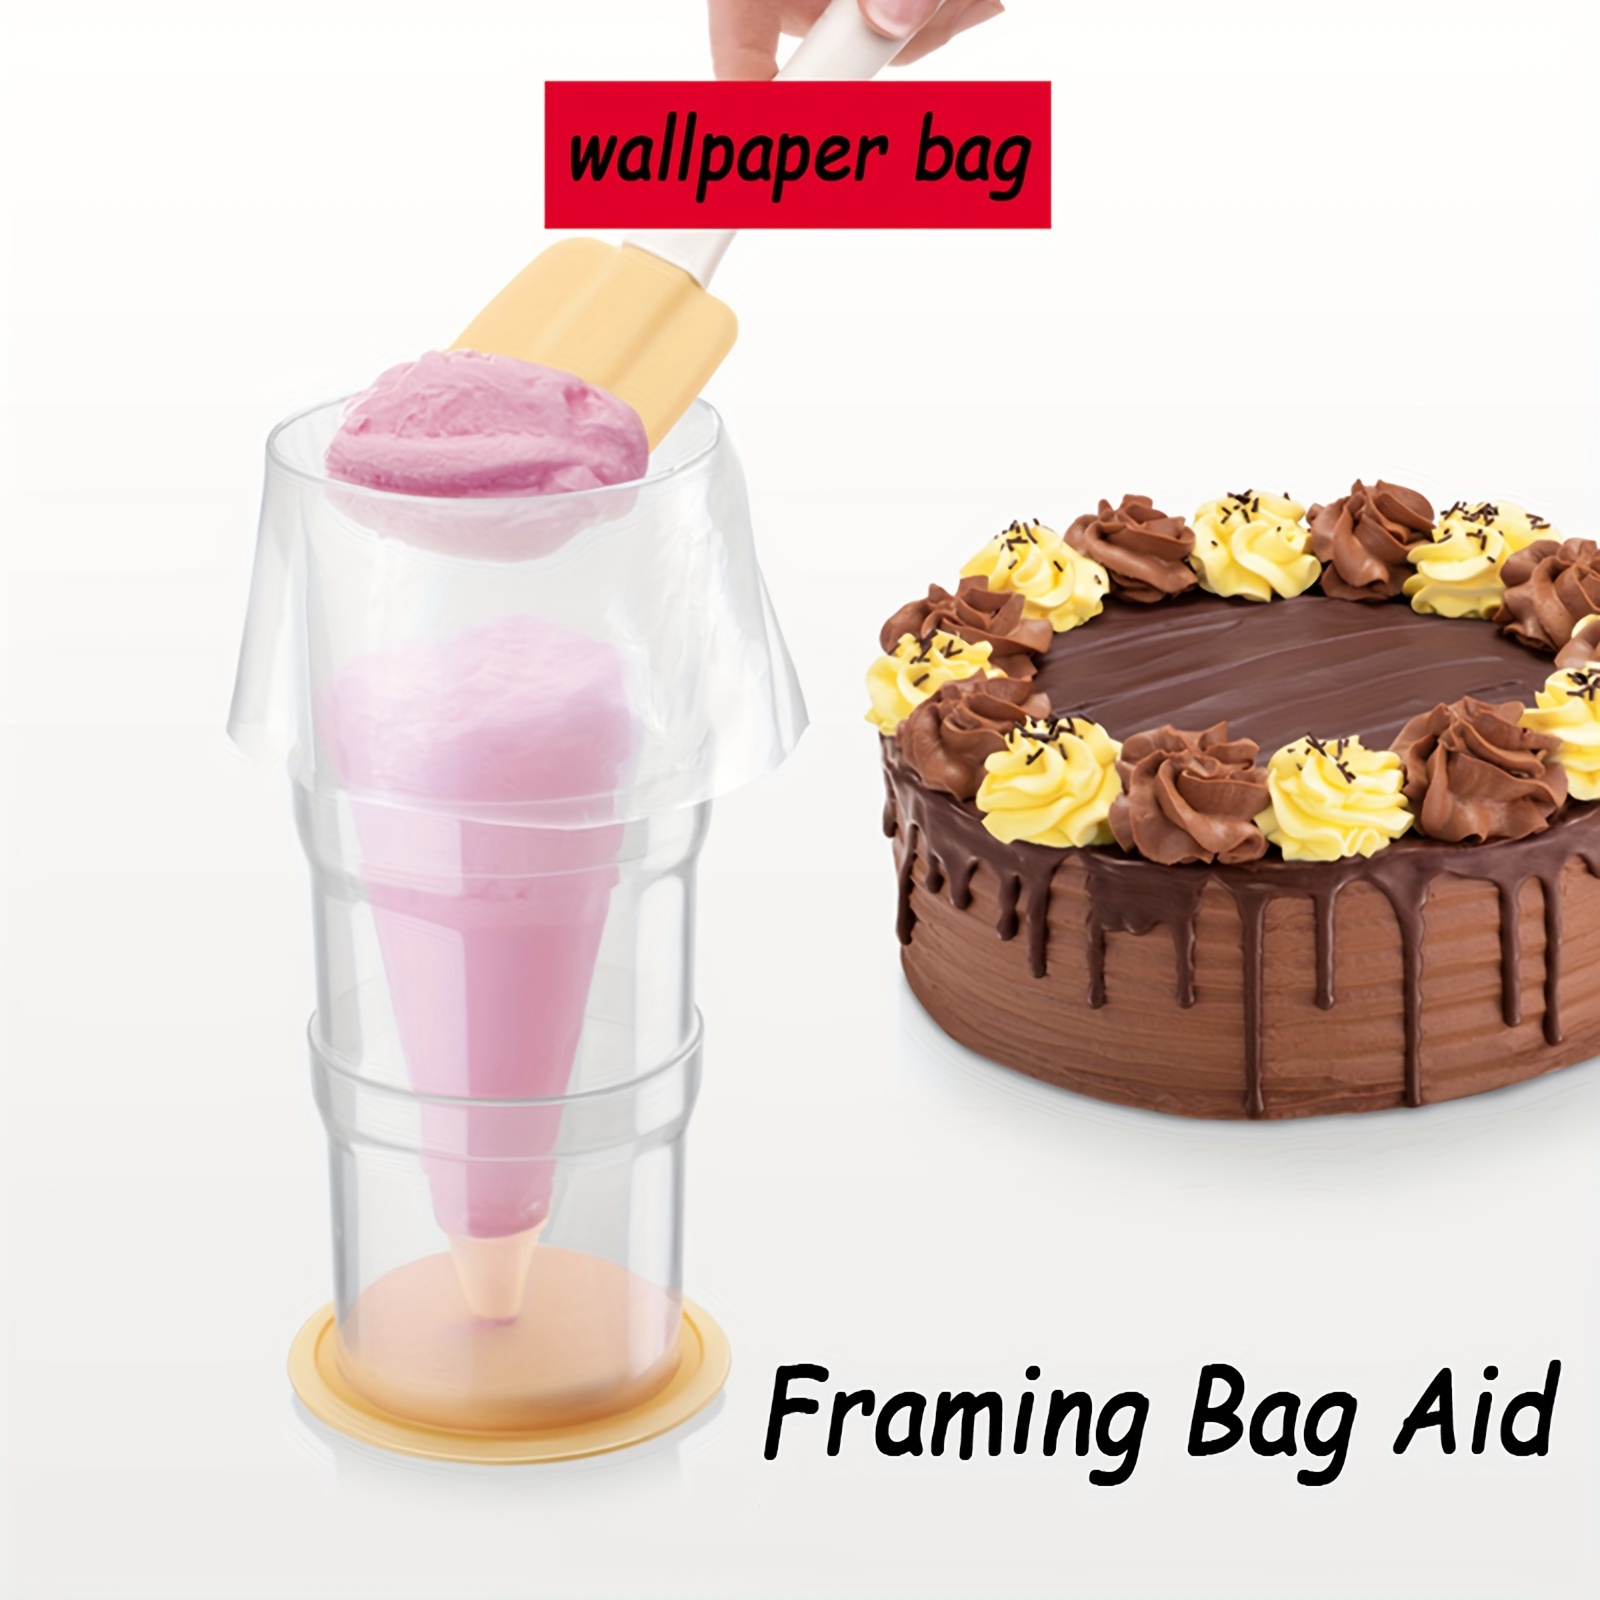 

1pc Piping Bag Filling Stand (3.74''x 8.27''/ 9.5cm*21cm), Frosting Dispenser Support, Pastry Cream Cupcake Decorating Tool For Baking Beginners, Durable Polypropylene Material